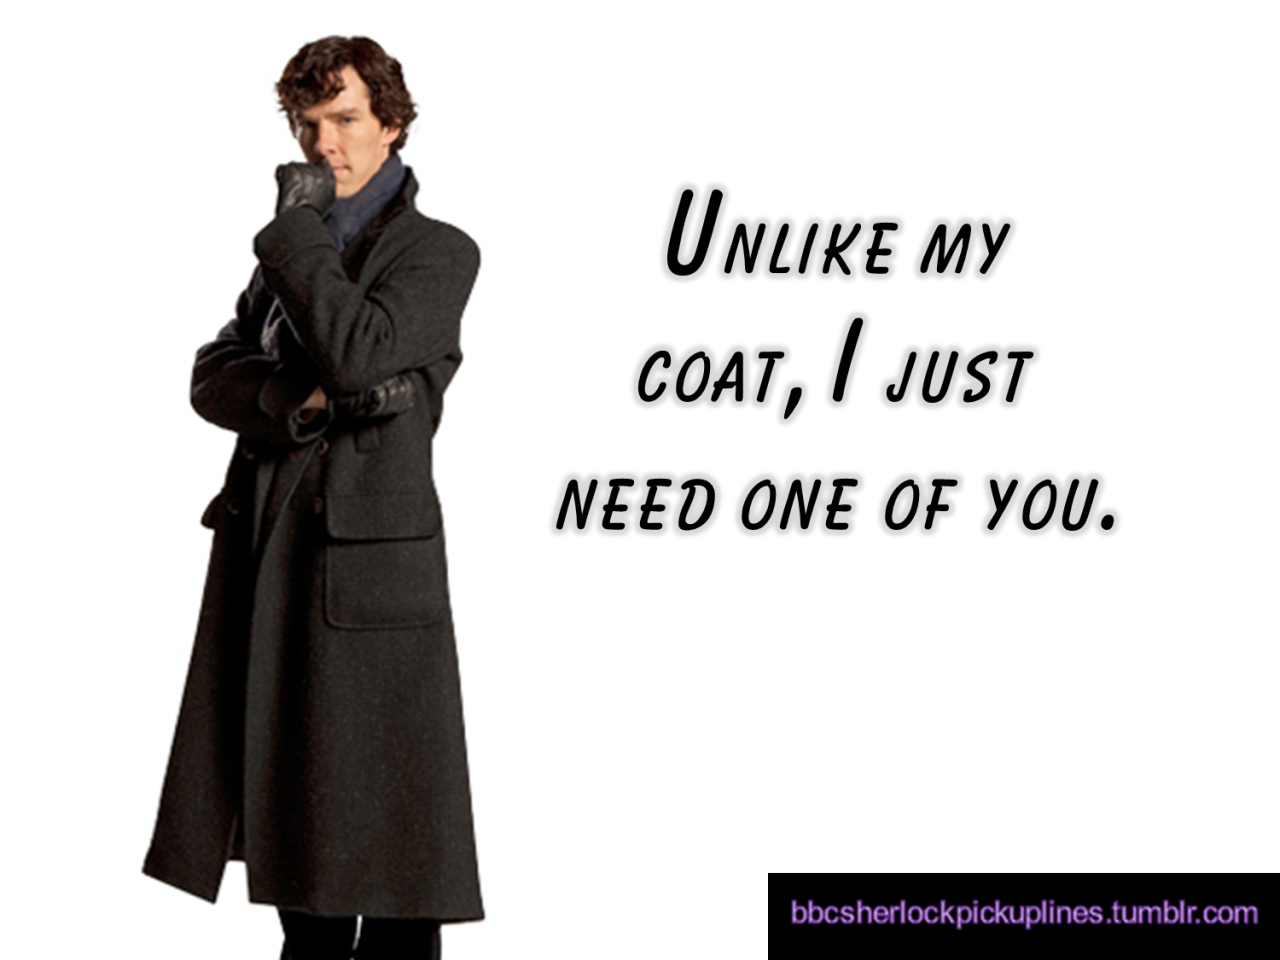 â€œUnlike my coat, I just need one of you.â€Submitted by anonymous.